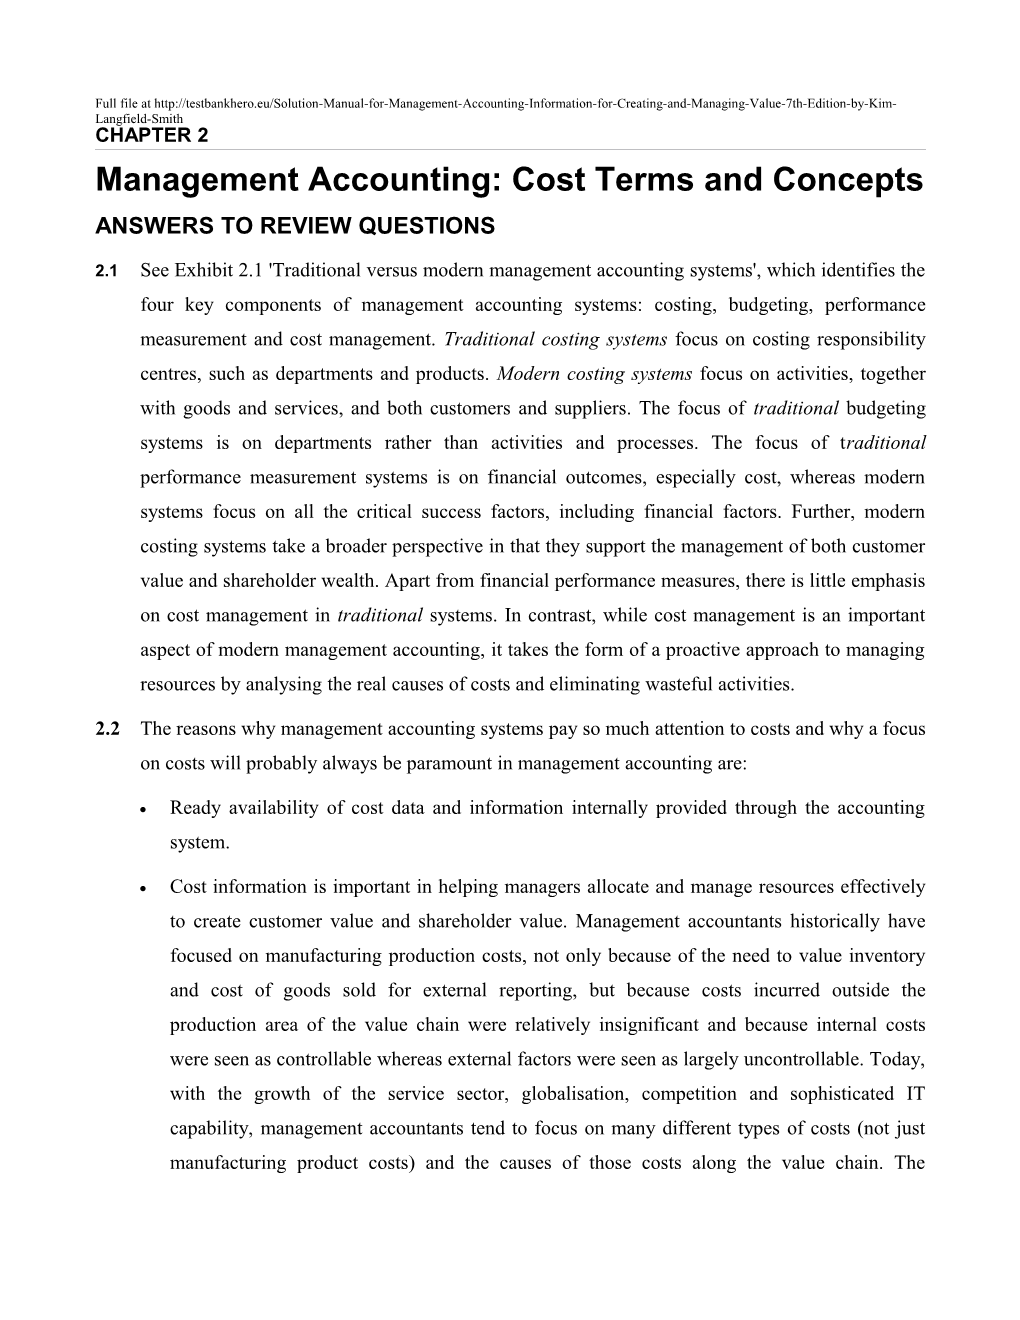 Management Accounting: Cost Termsand Concepts